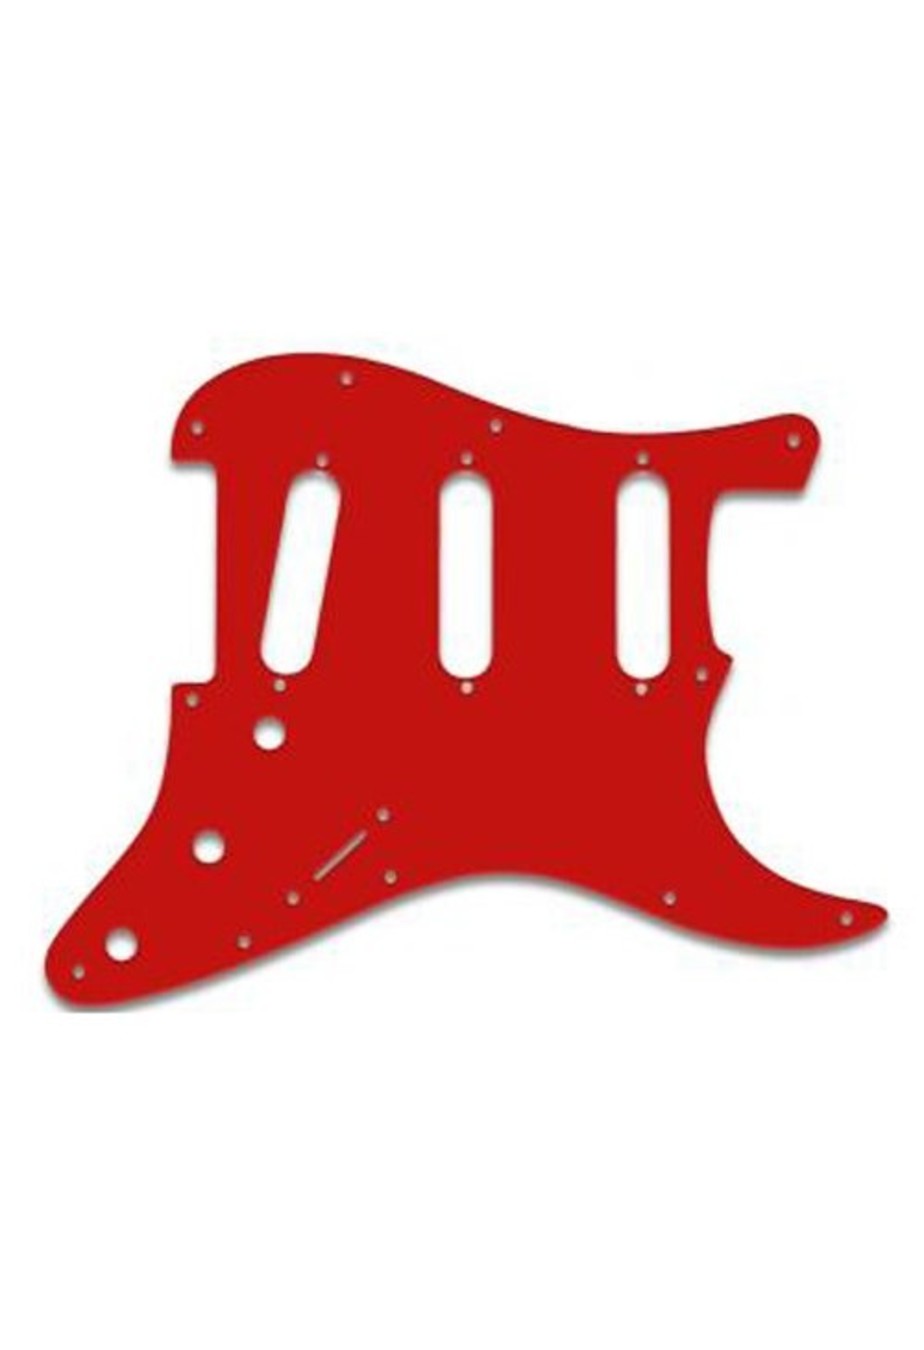 MannMade USA MannMade USA Fender Stratocaster 3 Ply - Red Black Red